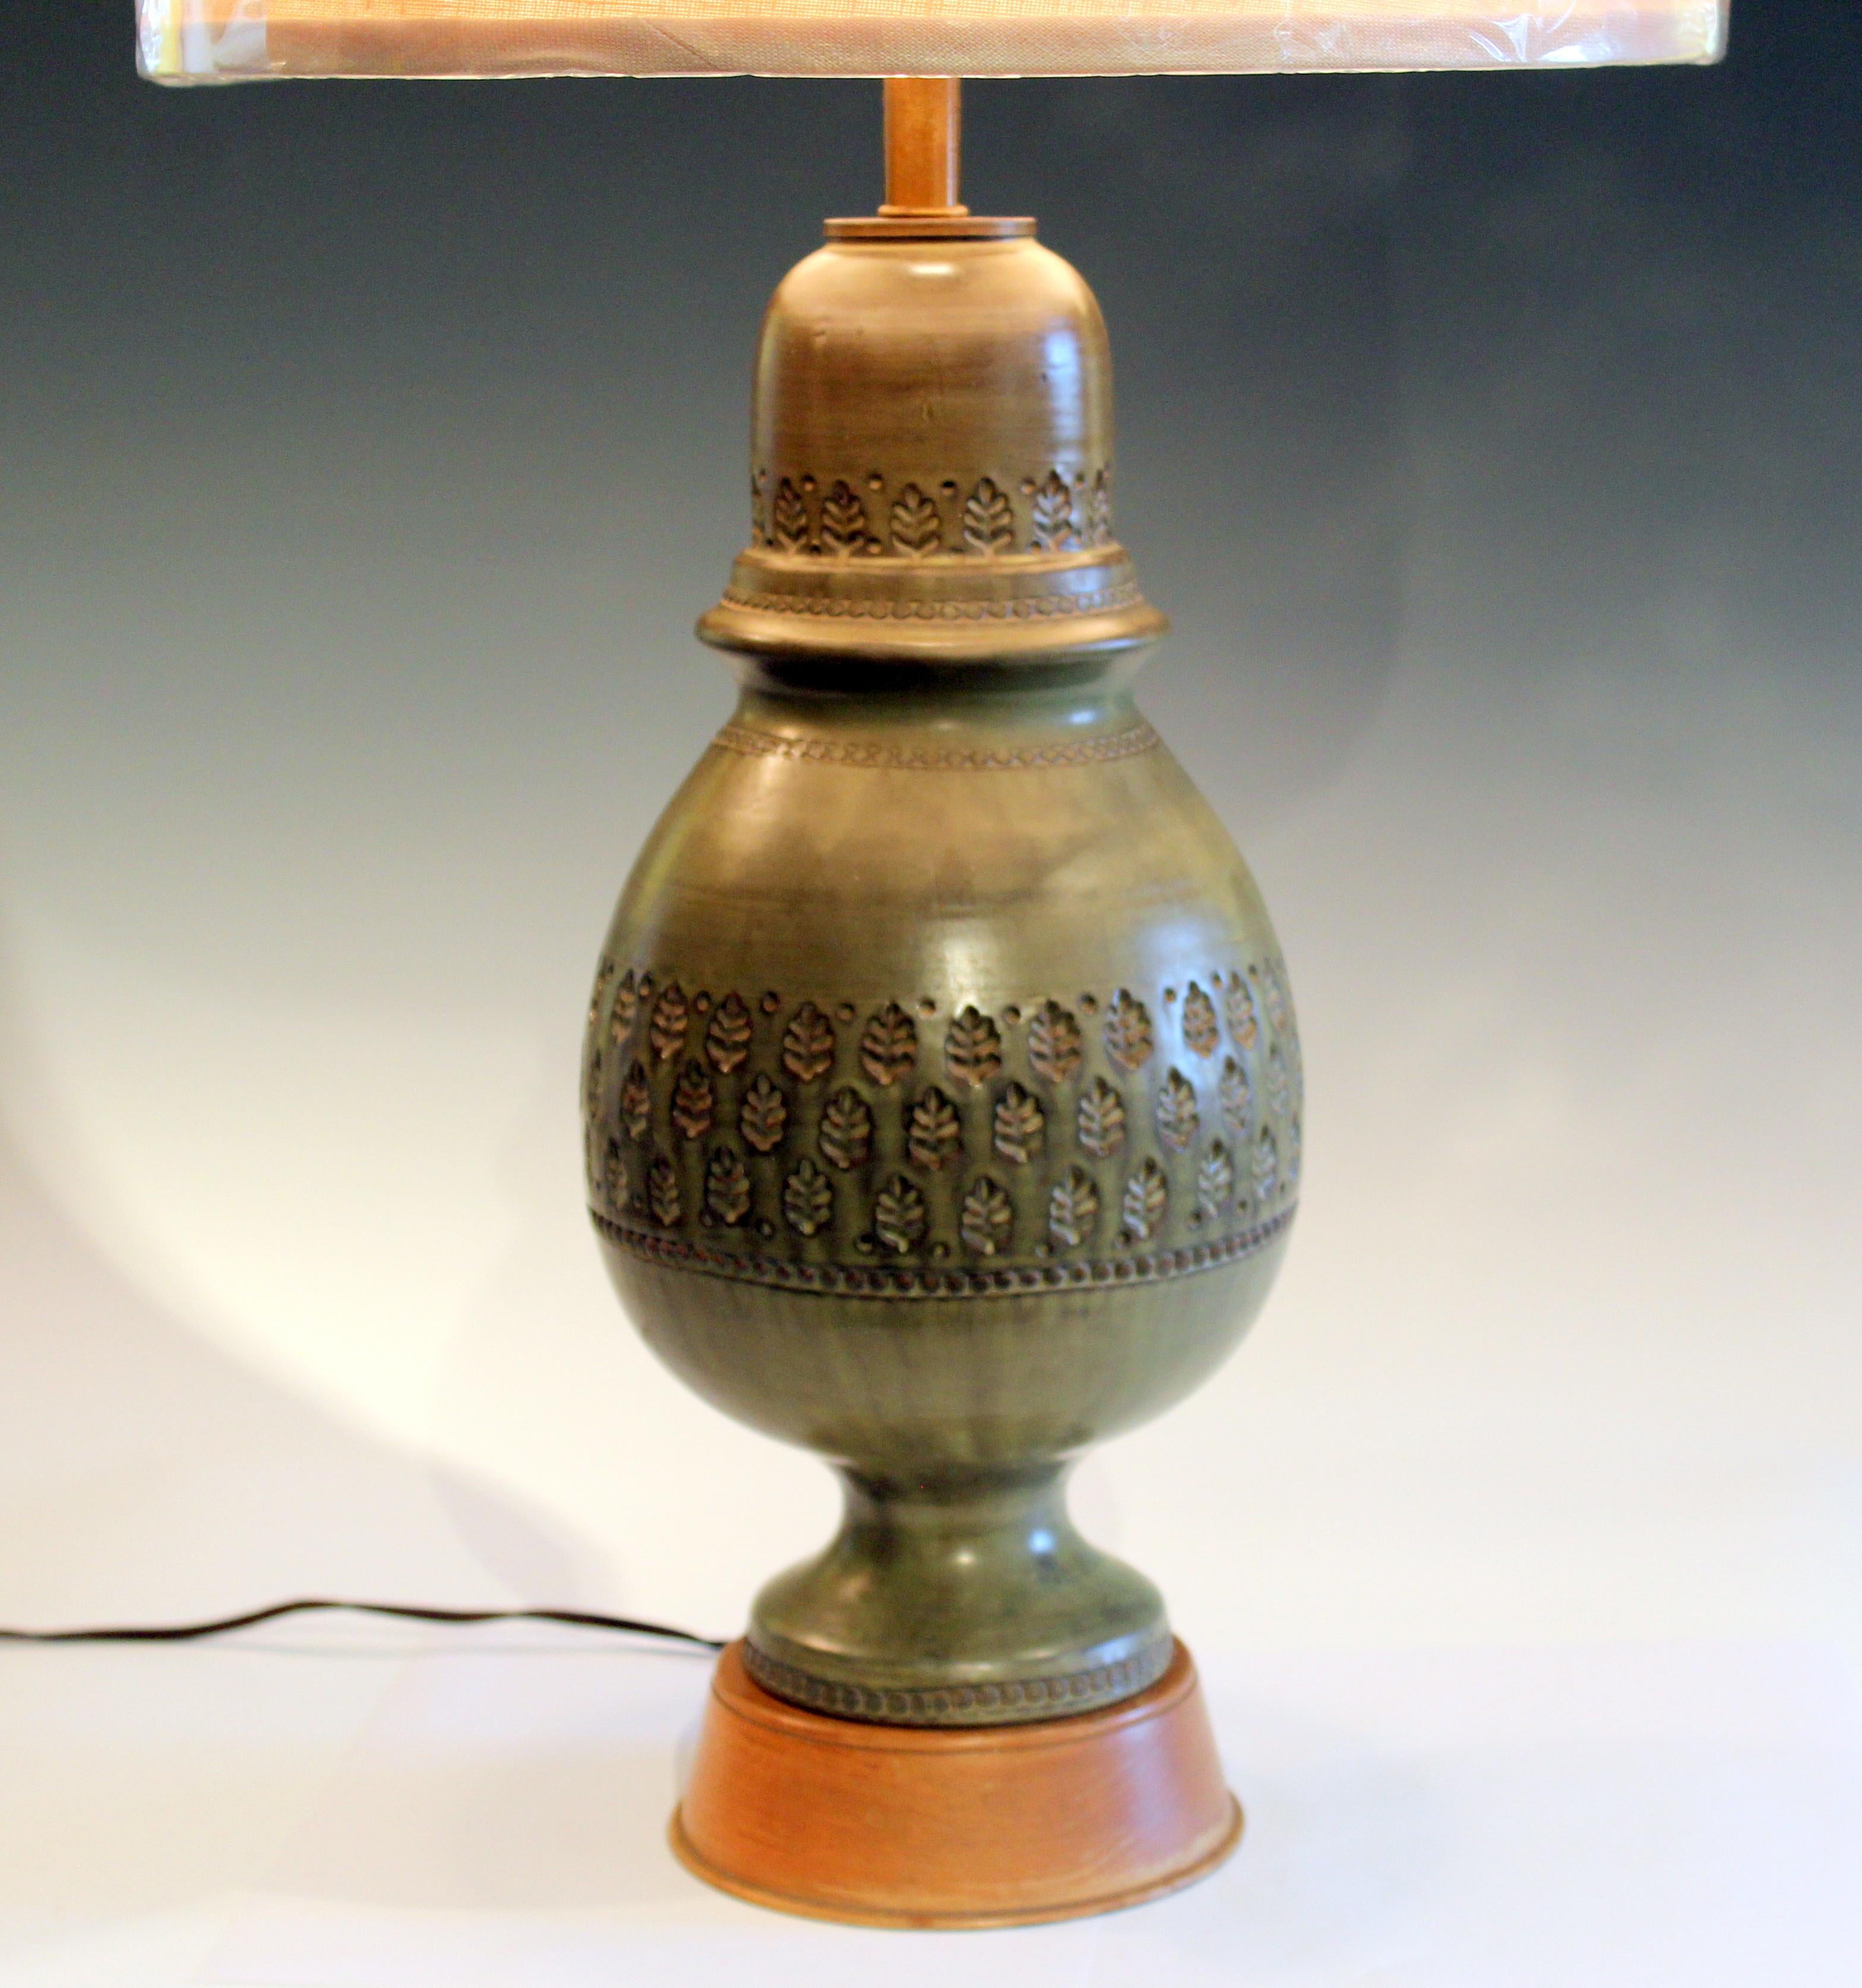 Bitossi lamp with rimini decoration on an olive green ground, circa 1960s. Measures: 32